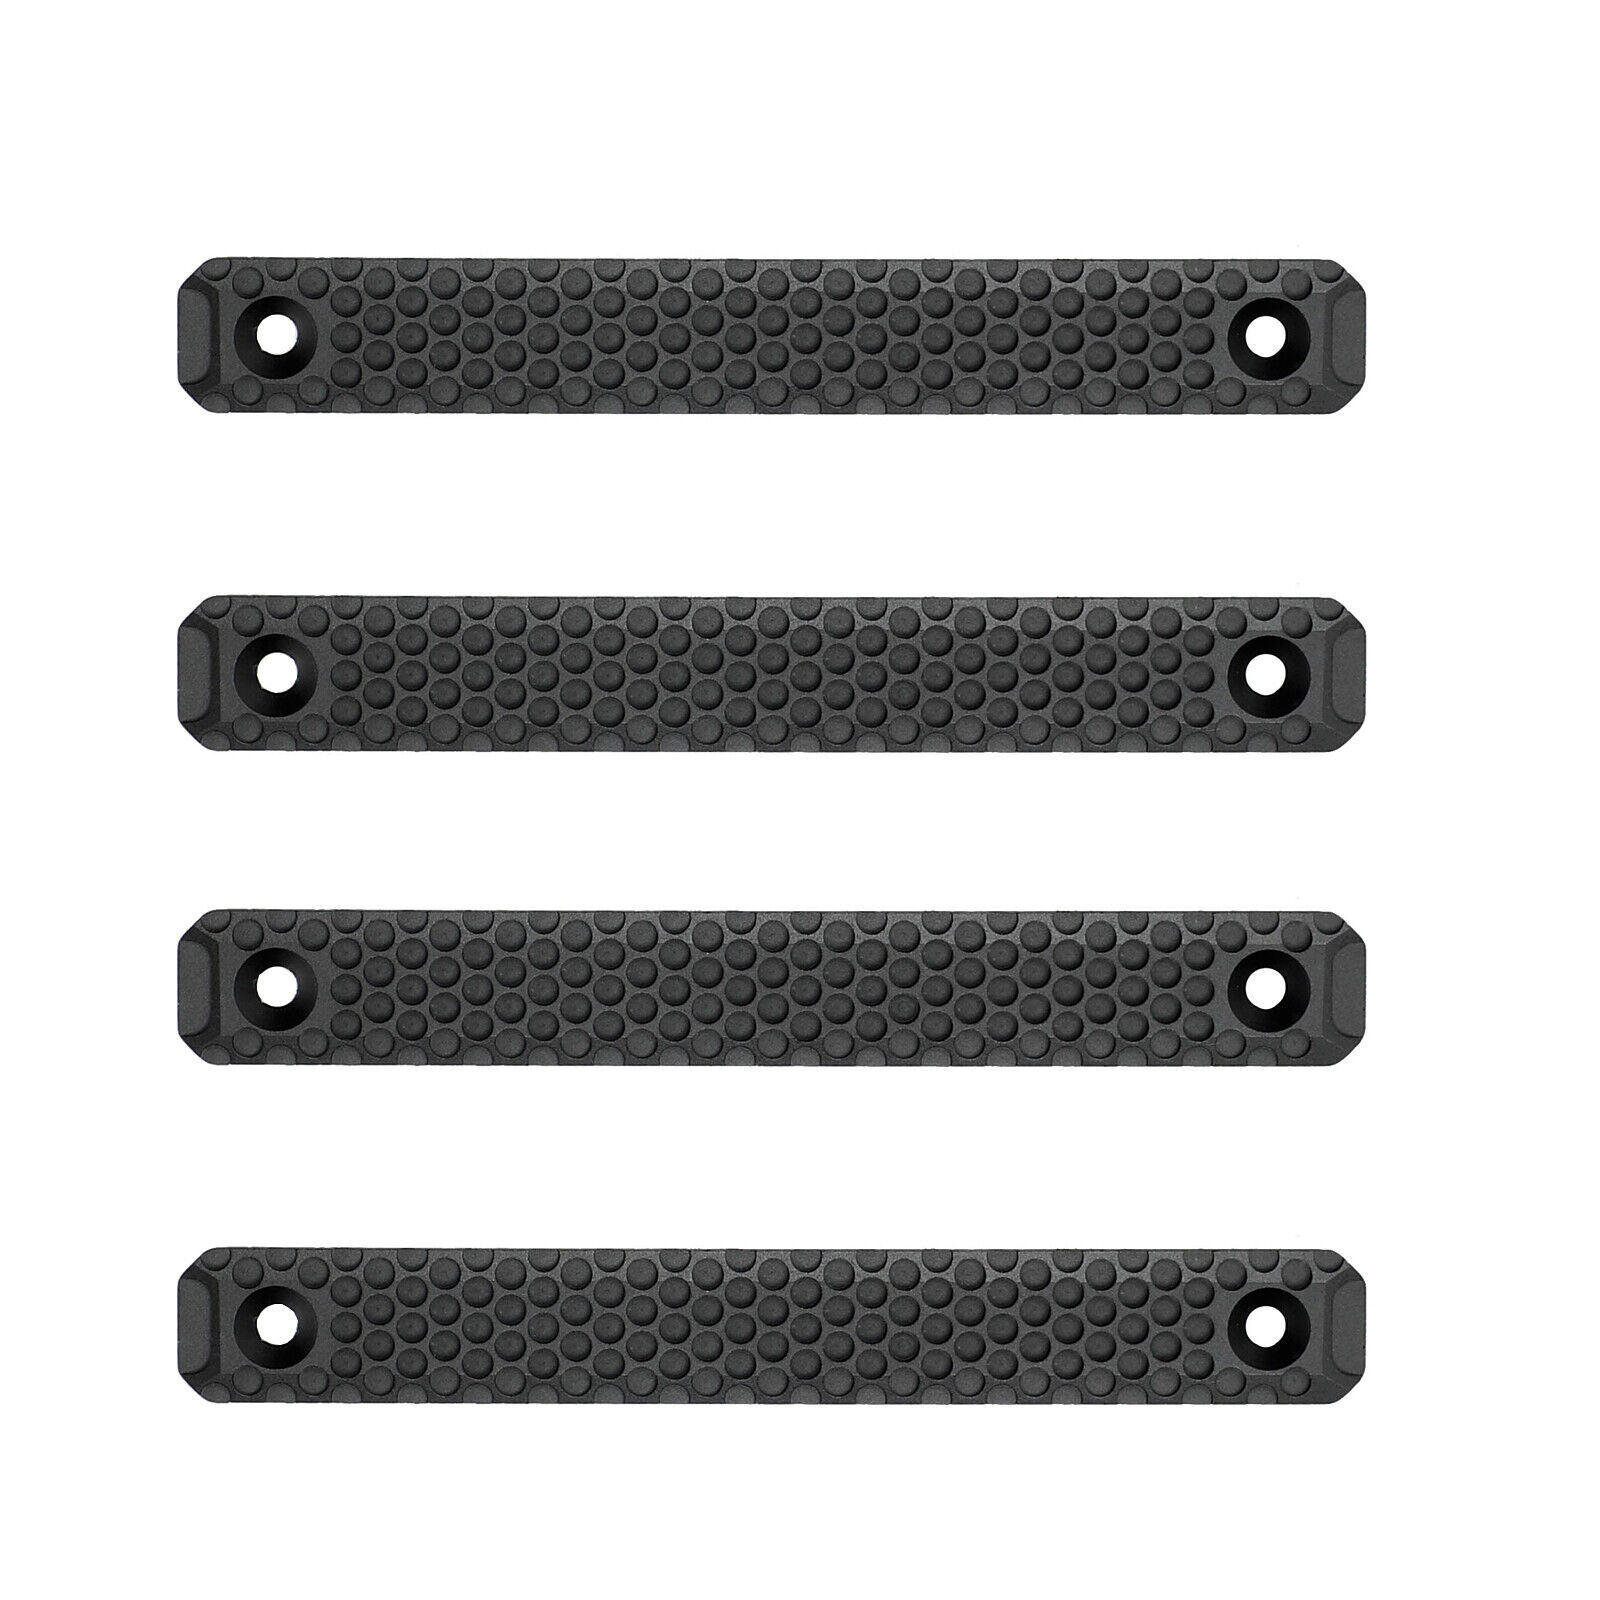 Tactical MLOK Rail Hand Protection M-lok Rail Cover Panel for M-lok System 4 PC